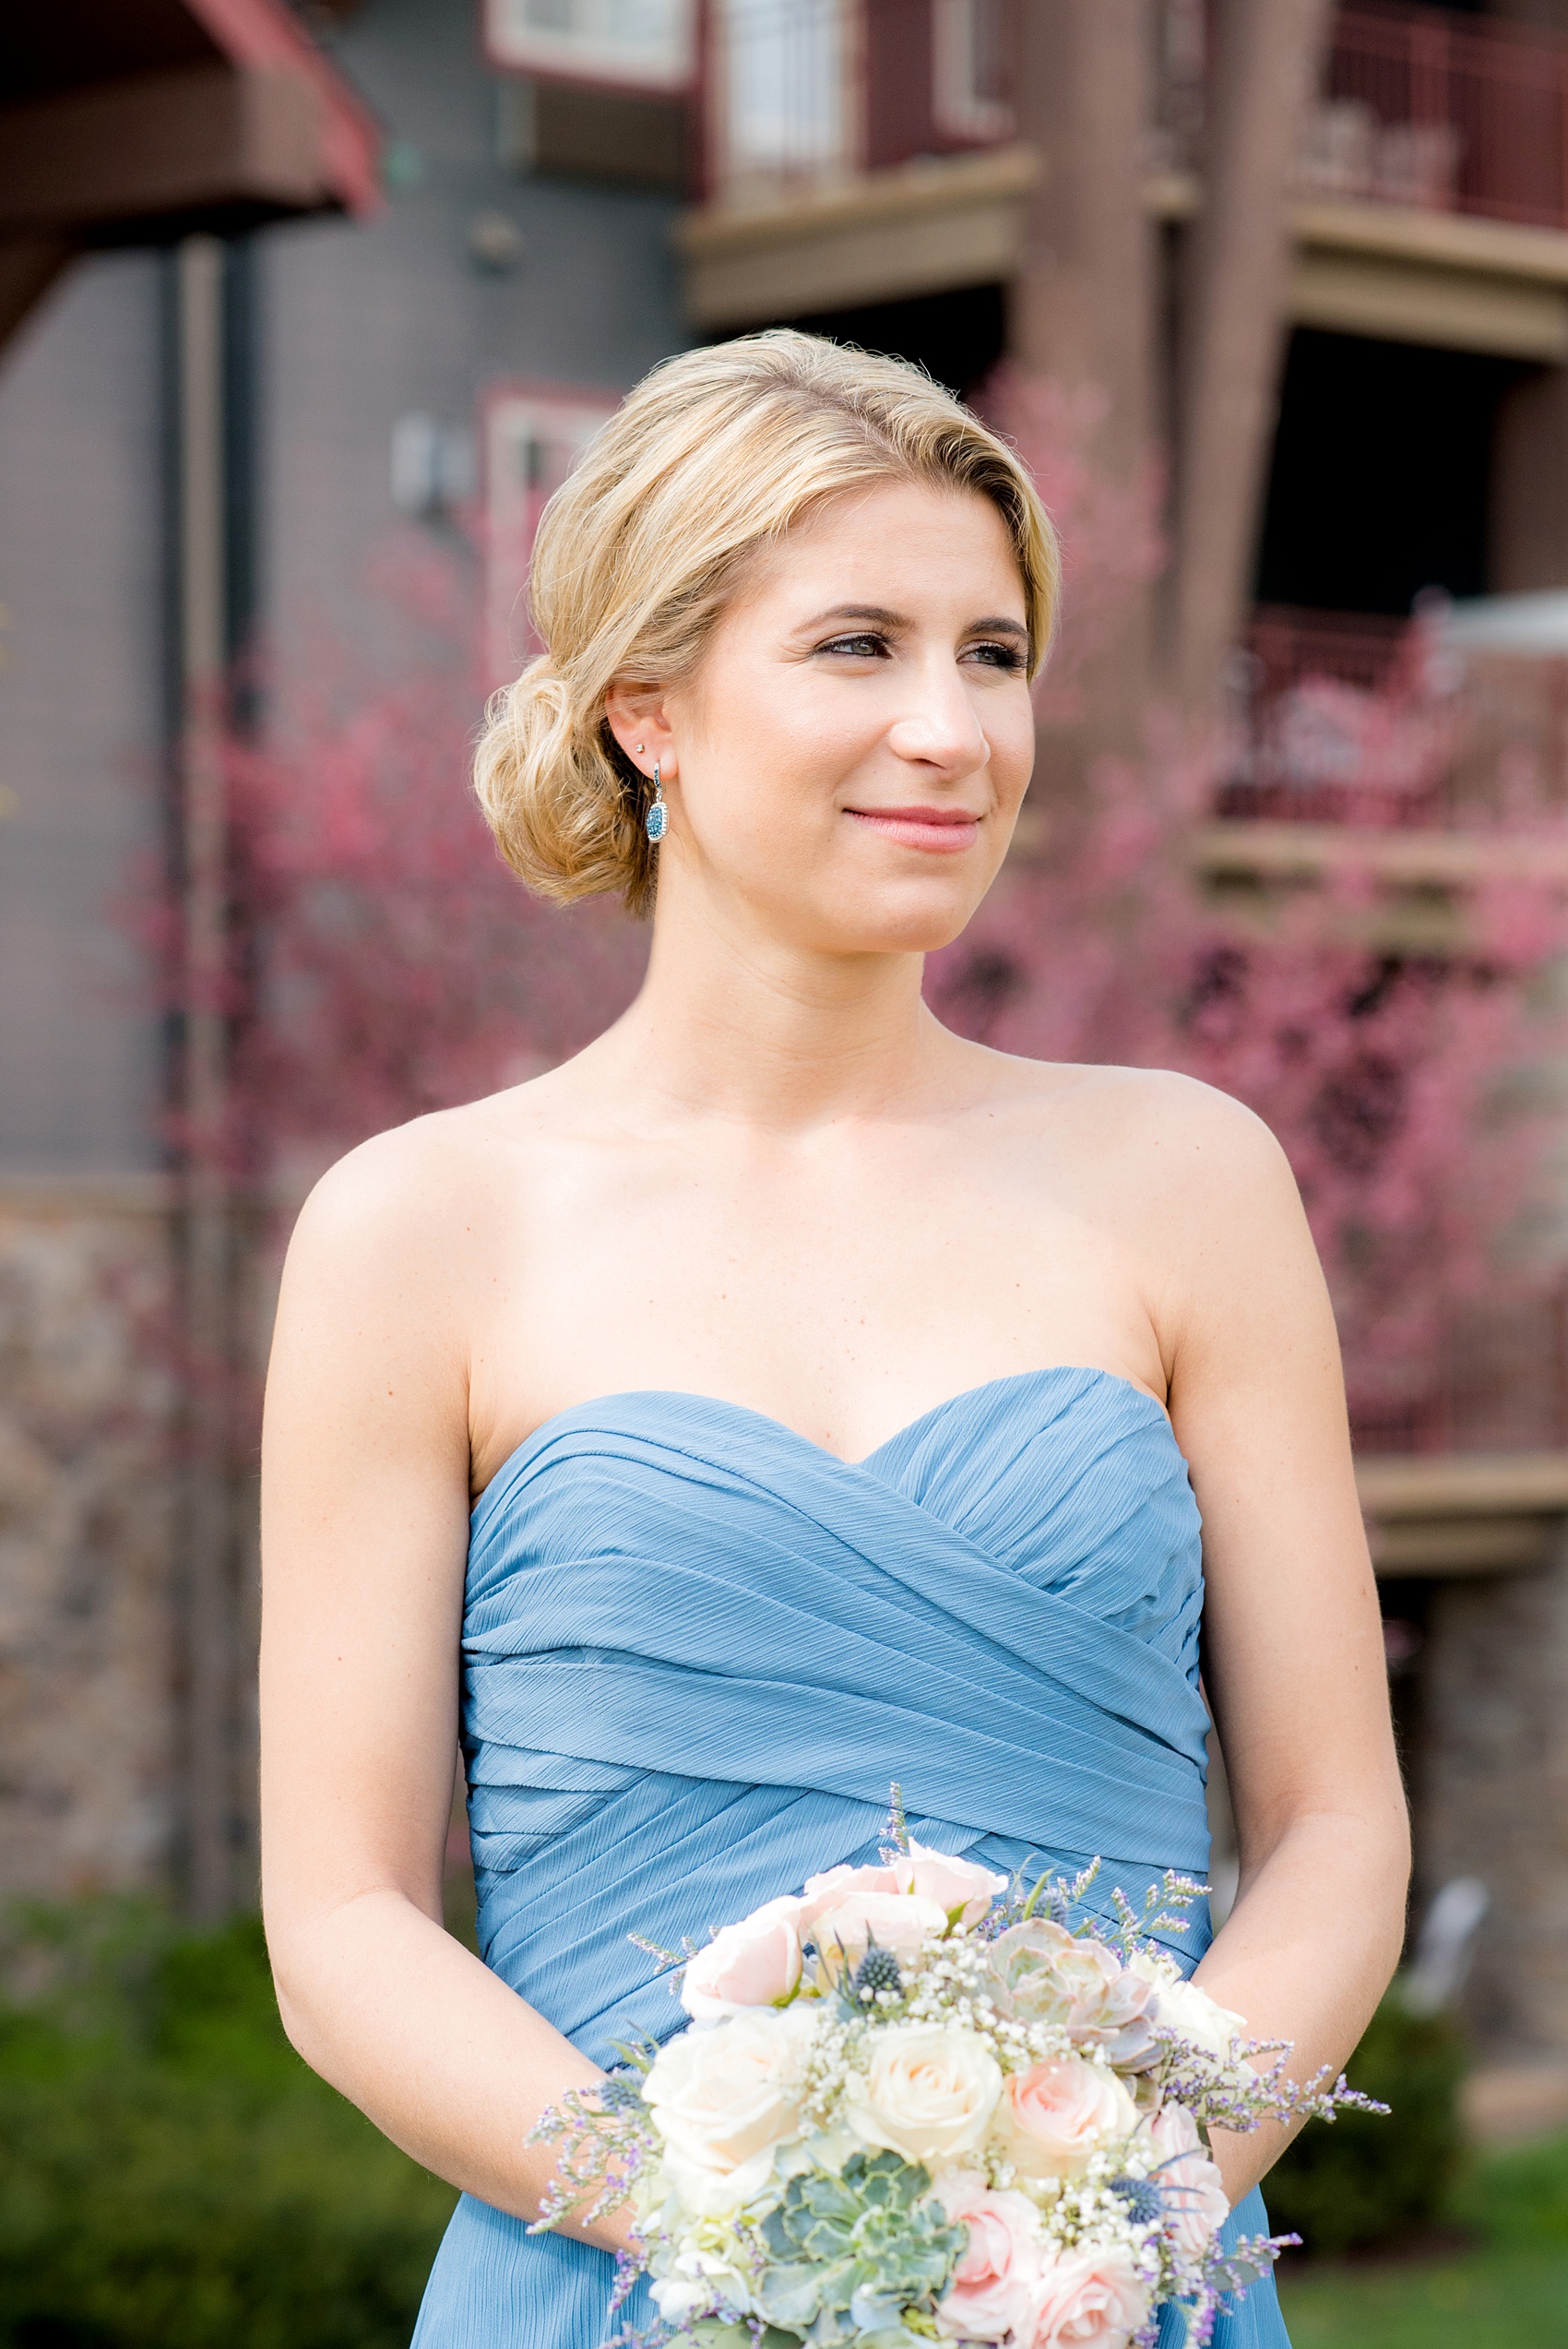 Crystal Springs Resort wedding photos in New Jersey, with photographer Mikkel Paige Photography. The couple’s spring wedding had an outdoor ceremony with photos at this rustic, woodsy venue showing their blue and pink palette decor from getting ready to their reception. This picture shows one bridesmaid in a strapless blue chiffon gown. Click through to see their complete wedding recap! #NewJerseywedding #MikkelPaige #NJweddingphotographer #NJphotographer #brideandgroom #springwedding #mismatchedgowns #pinkandblue #weddingparty #bridalparty